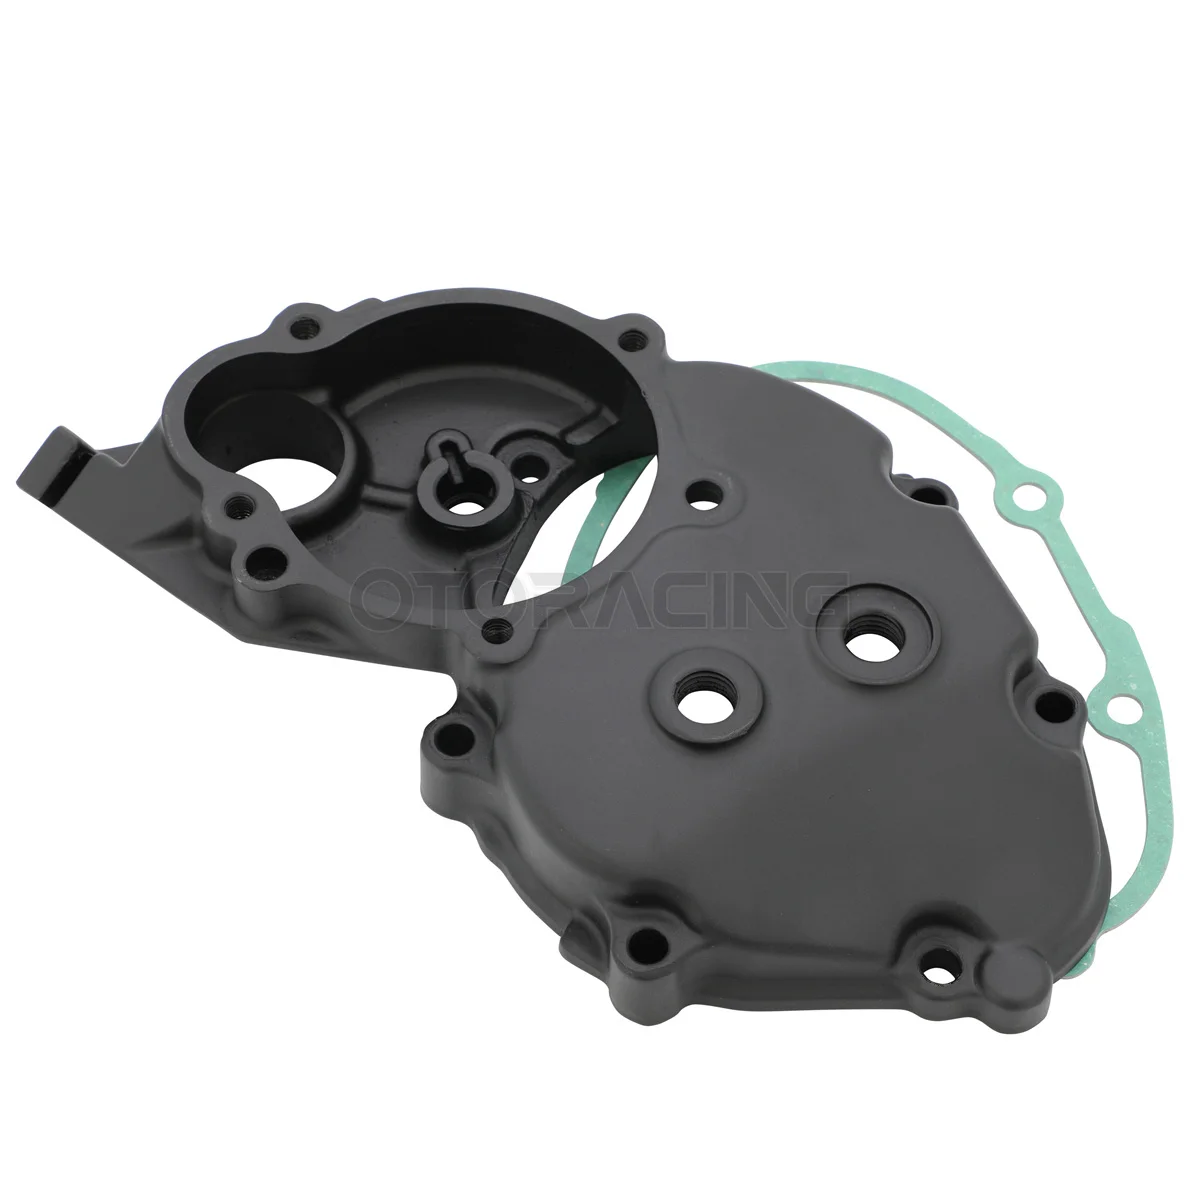 

Motorcycle Right Stator Engine Crankcase Cover w/Gasket For Kawasaki Ninja ZX-10R ZX10R ZX1000D 2006-2007